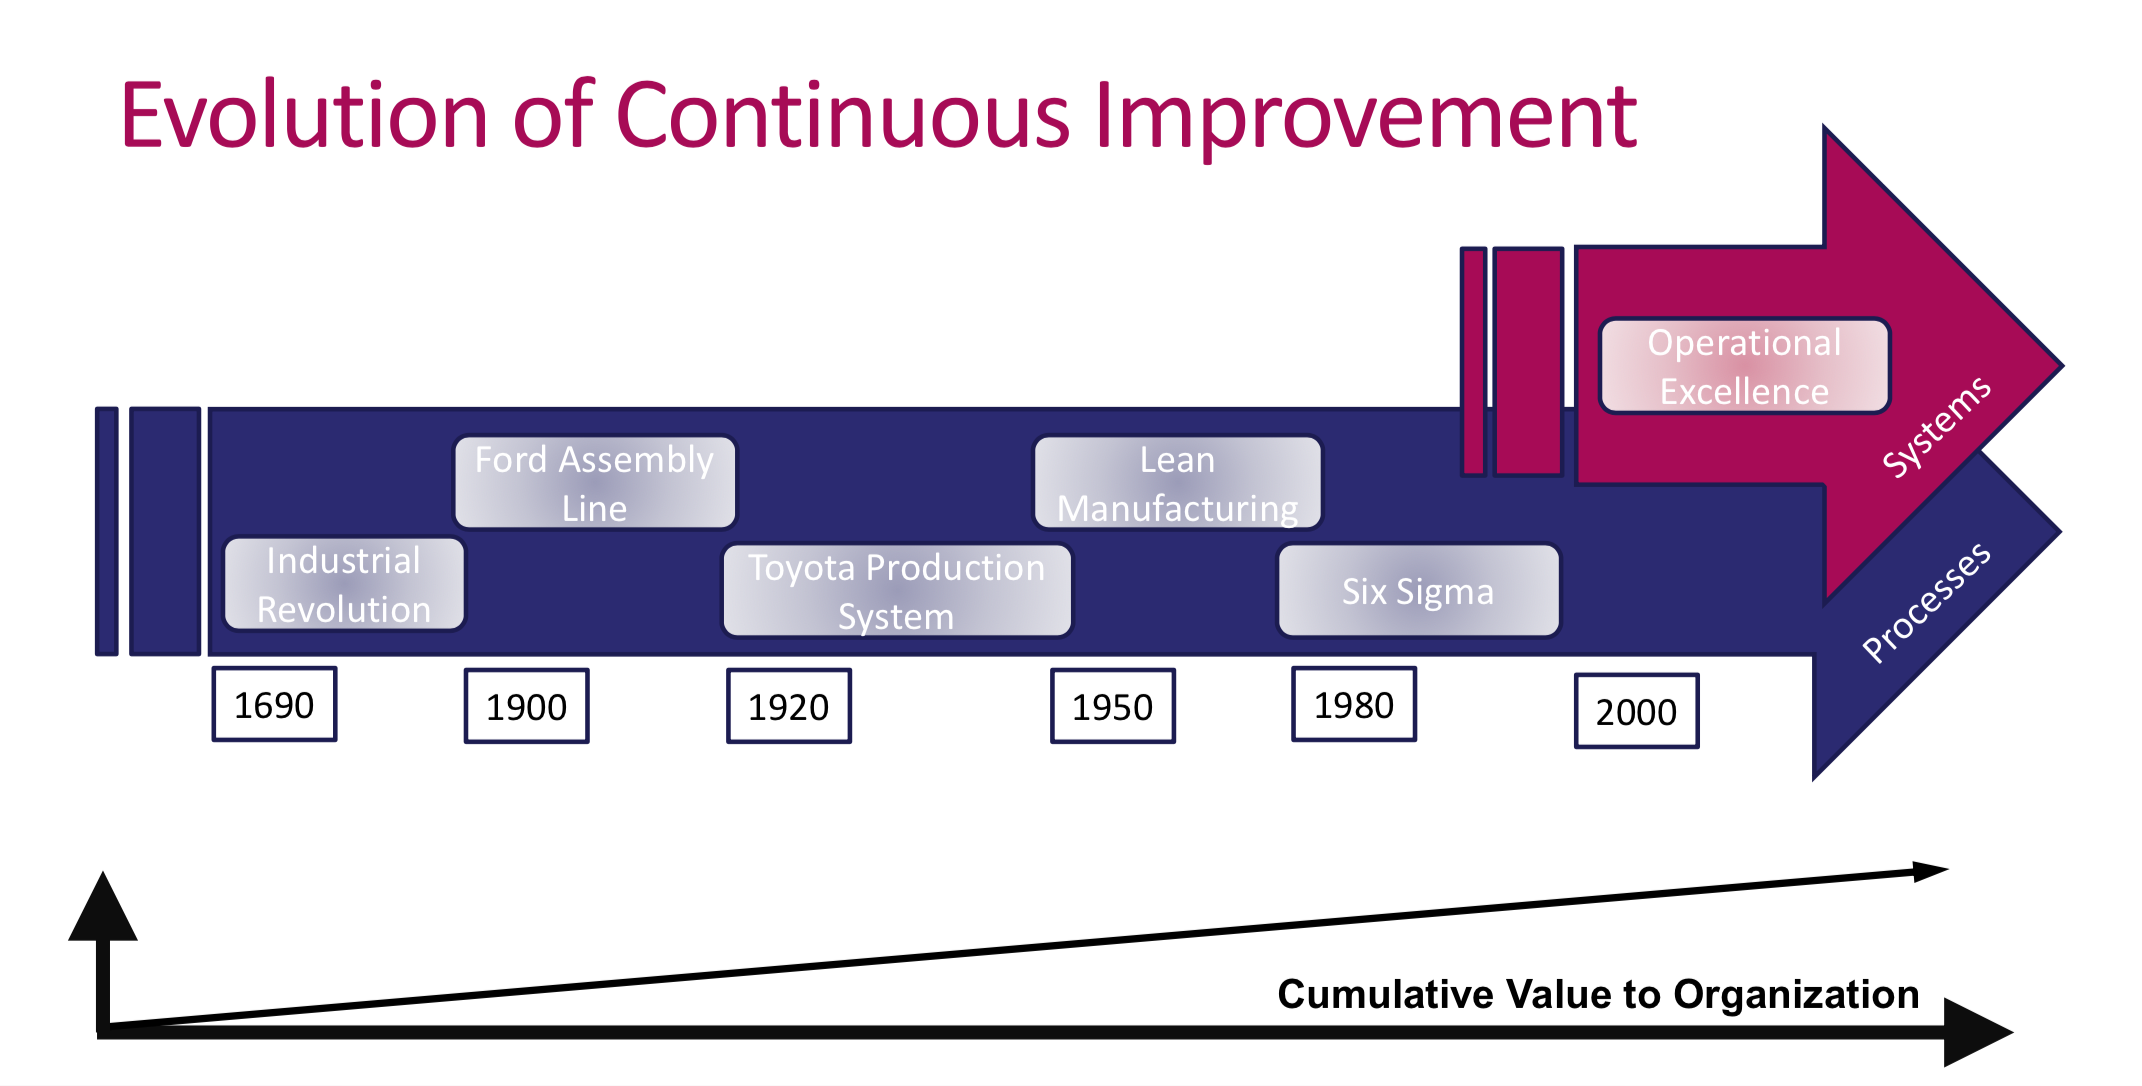 Lean and Operational Excellence Progression: “A State of Readiness”